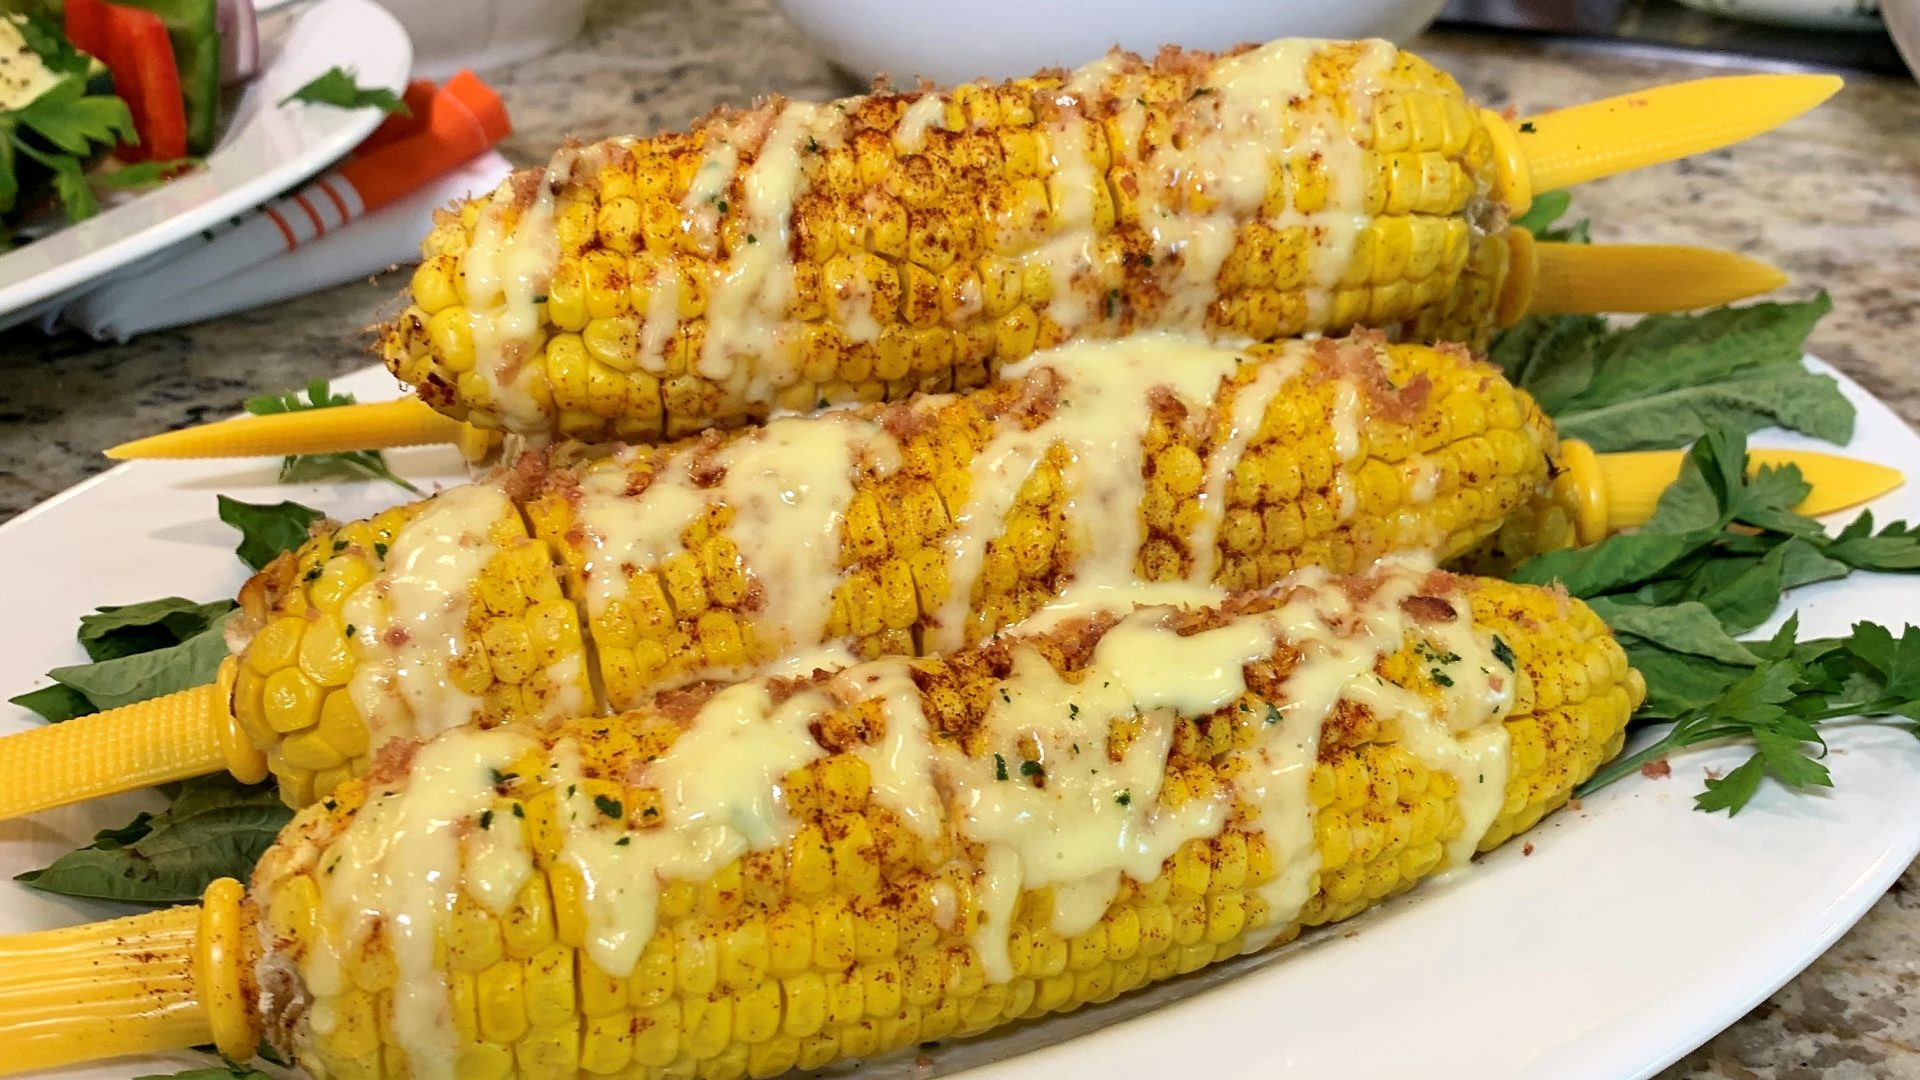 Three corn on the cob with cheese and sauce.